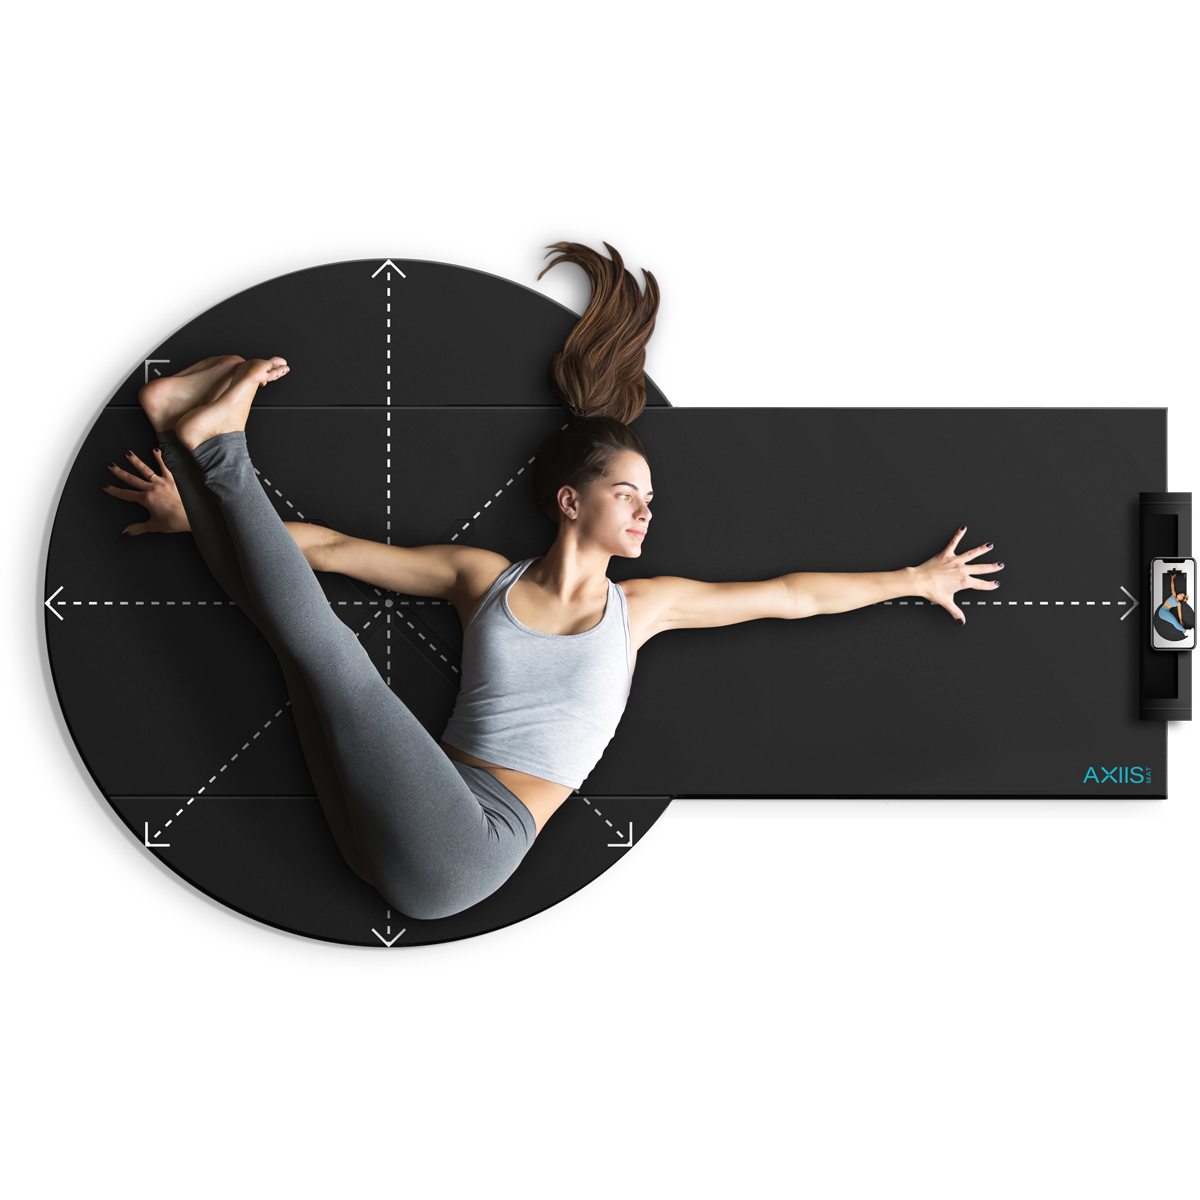 A Lady doing yoga on her Axiis Fit Yoga Mat and utilising the extra space from AXIIS Mats unique wing design